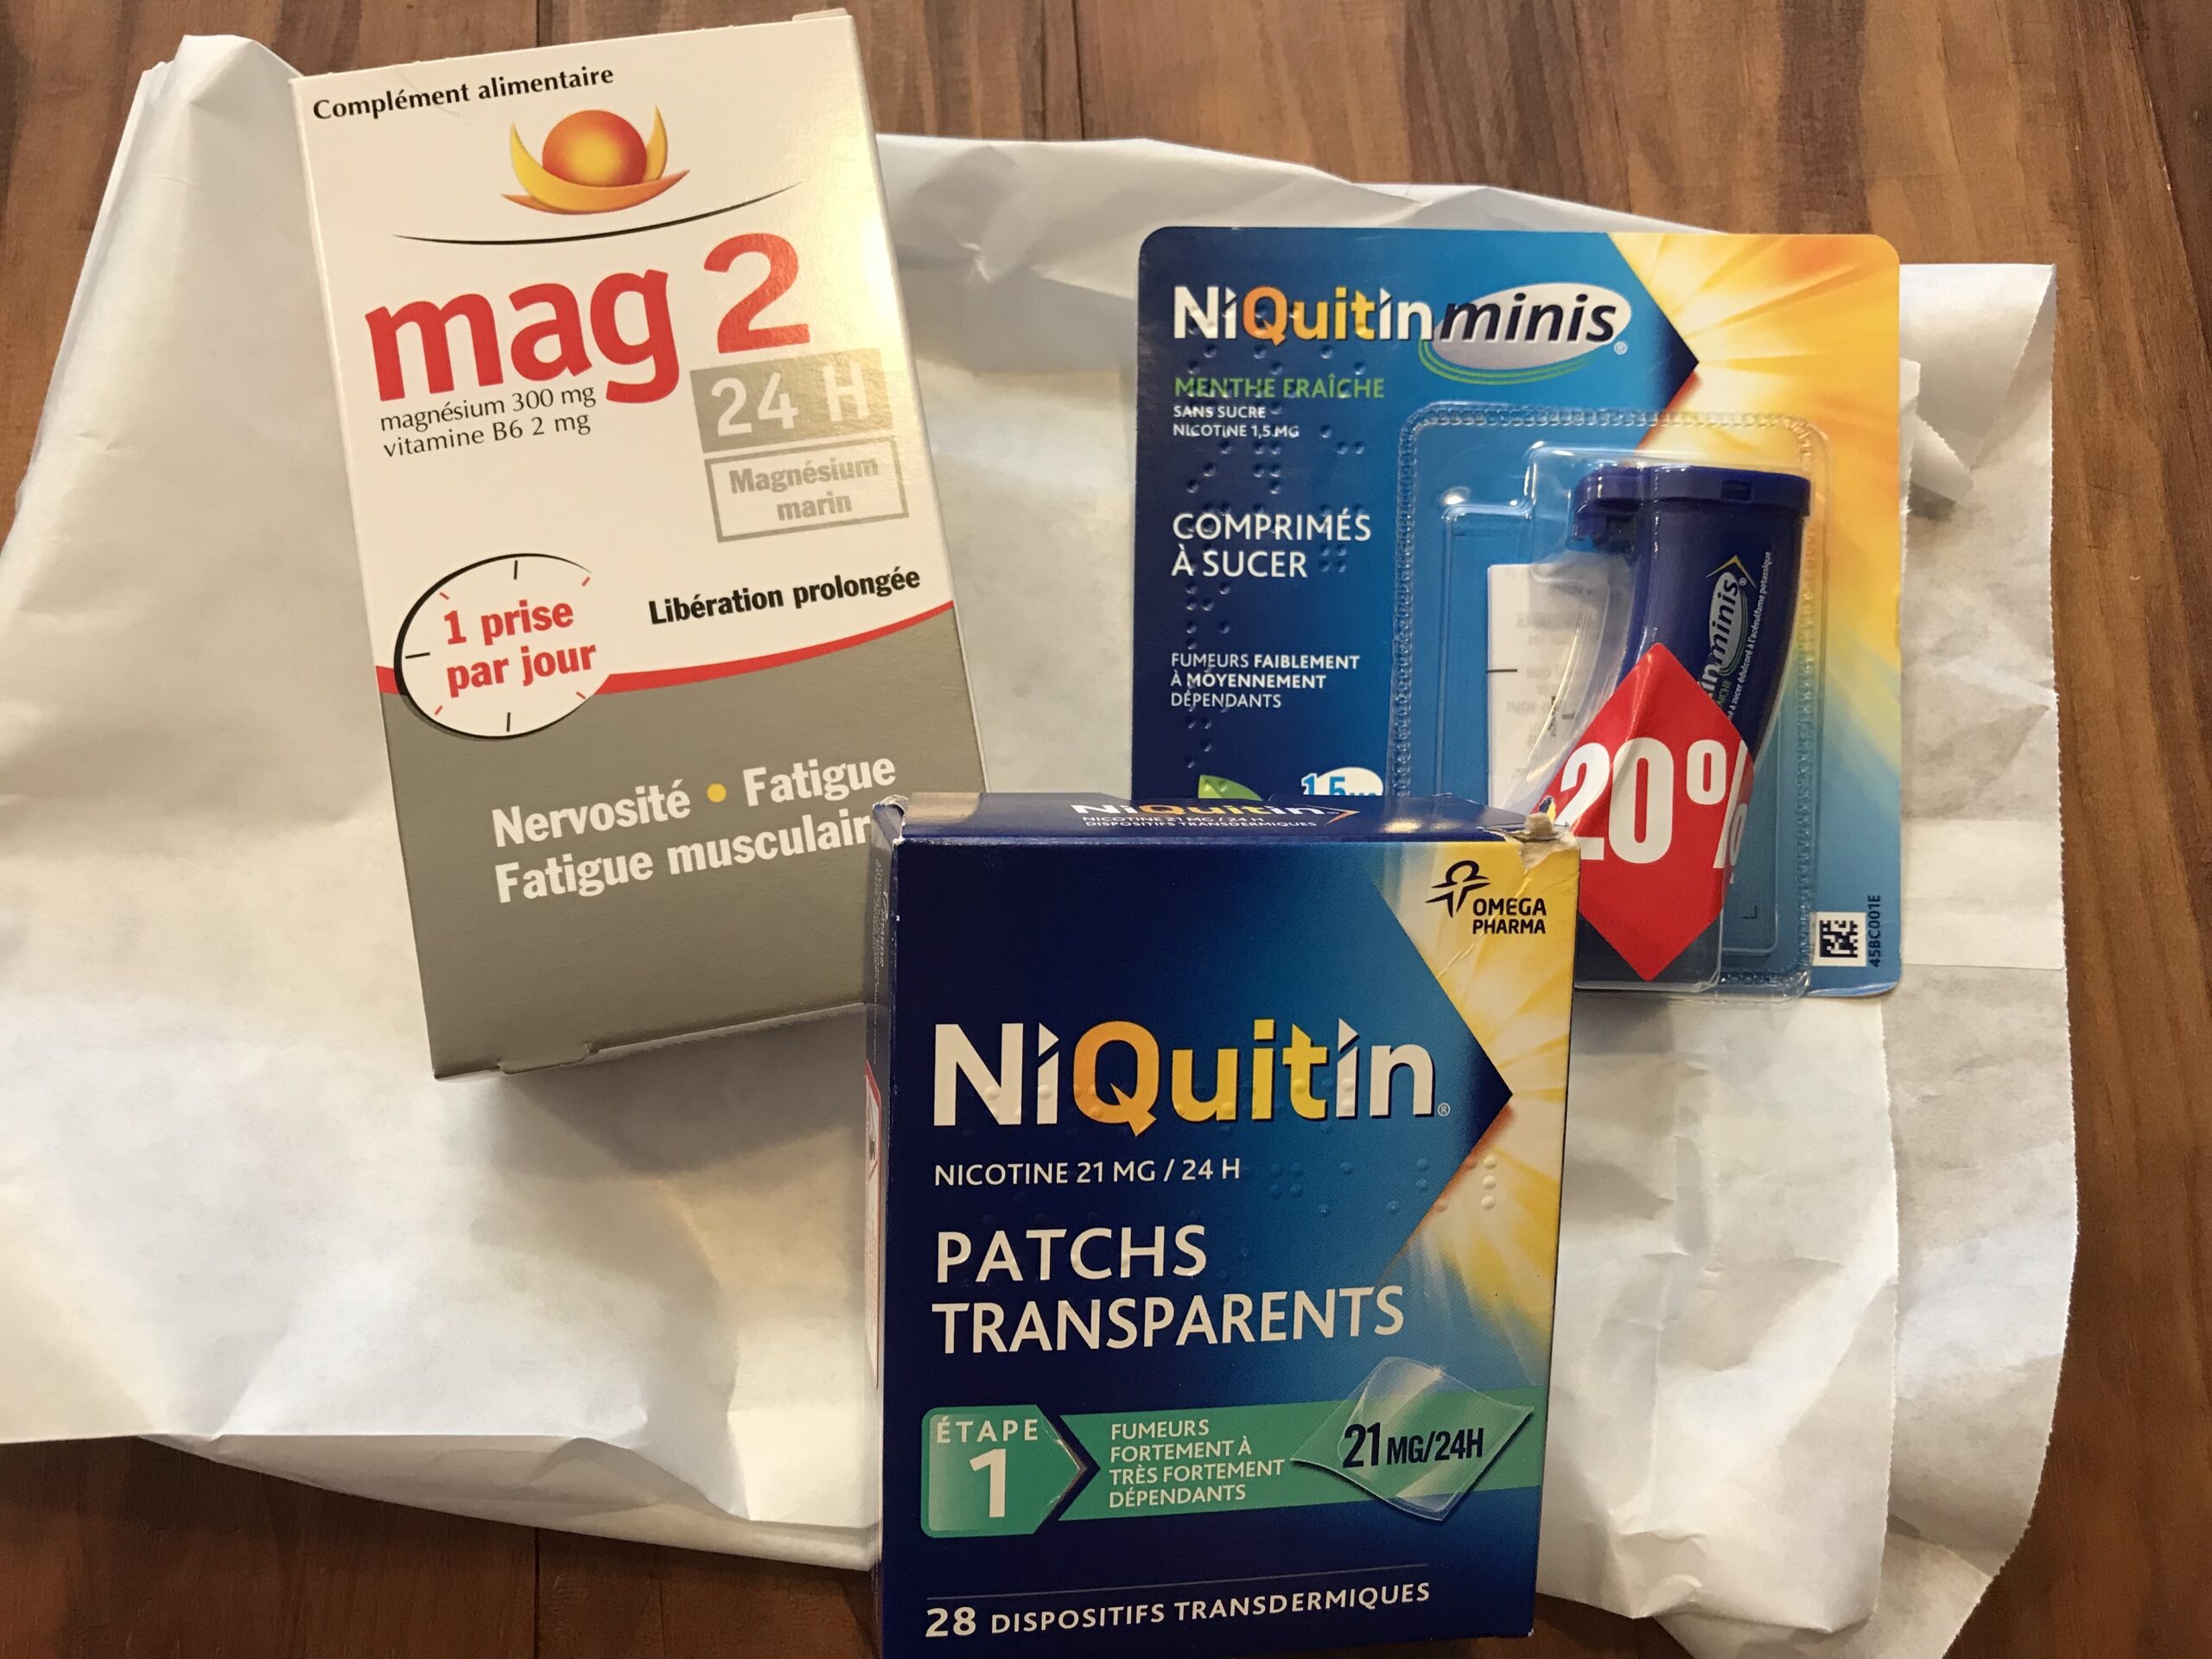 Nicotine patches, lozenges and vitamin tablets